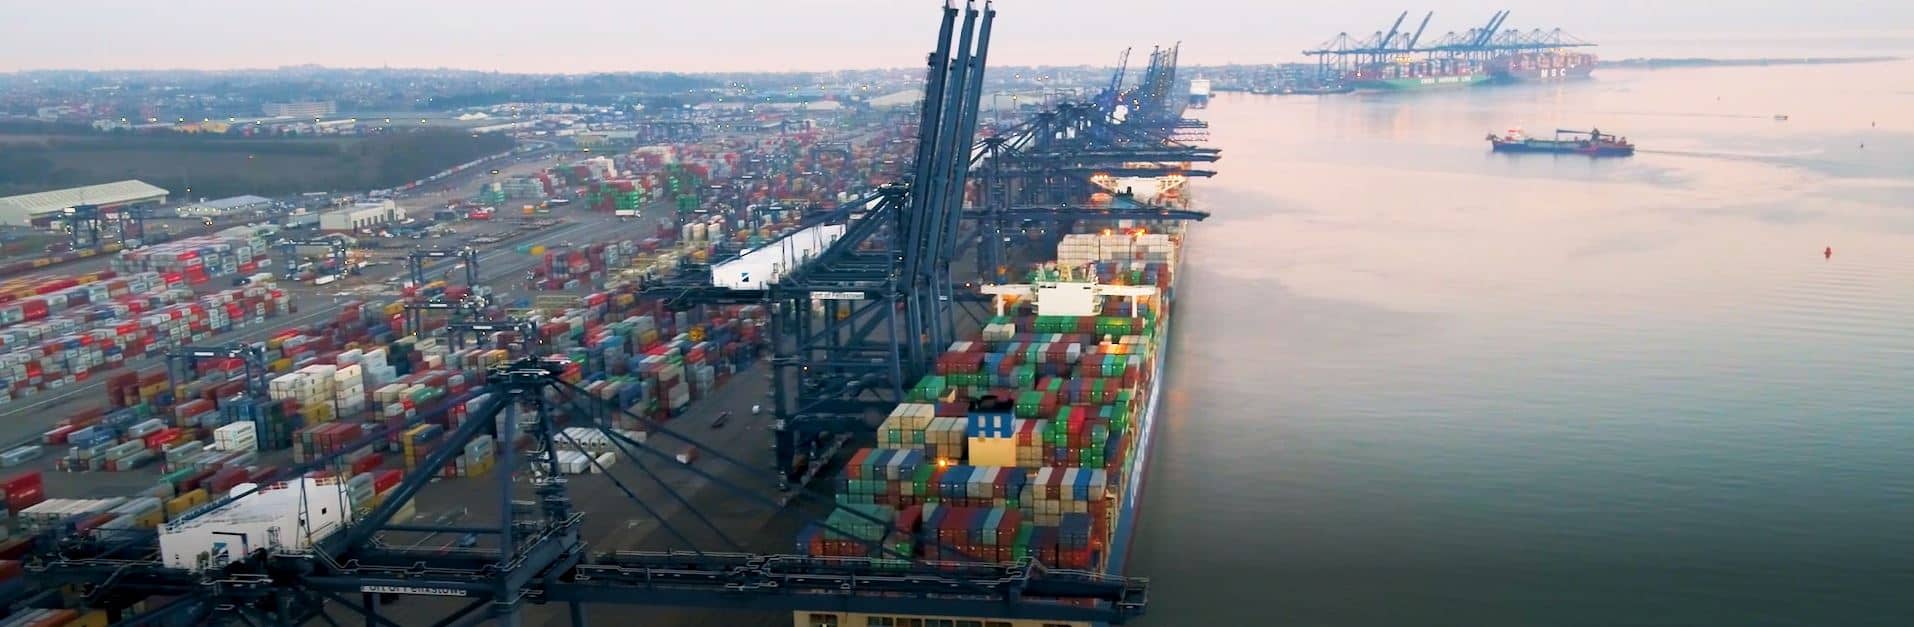 Port of Felixstowe to trial 5G technology